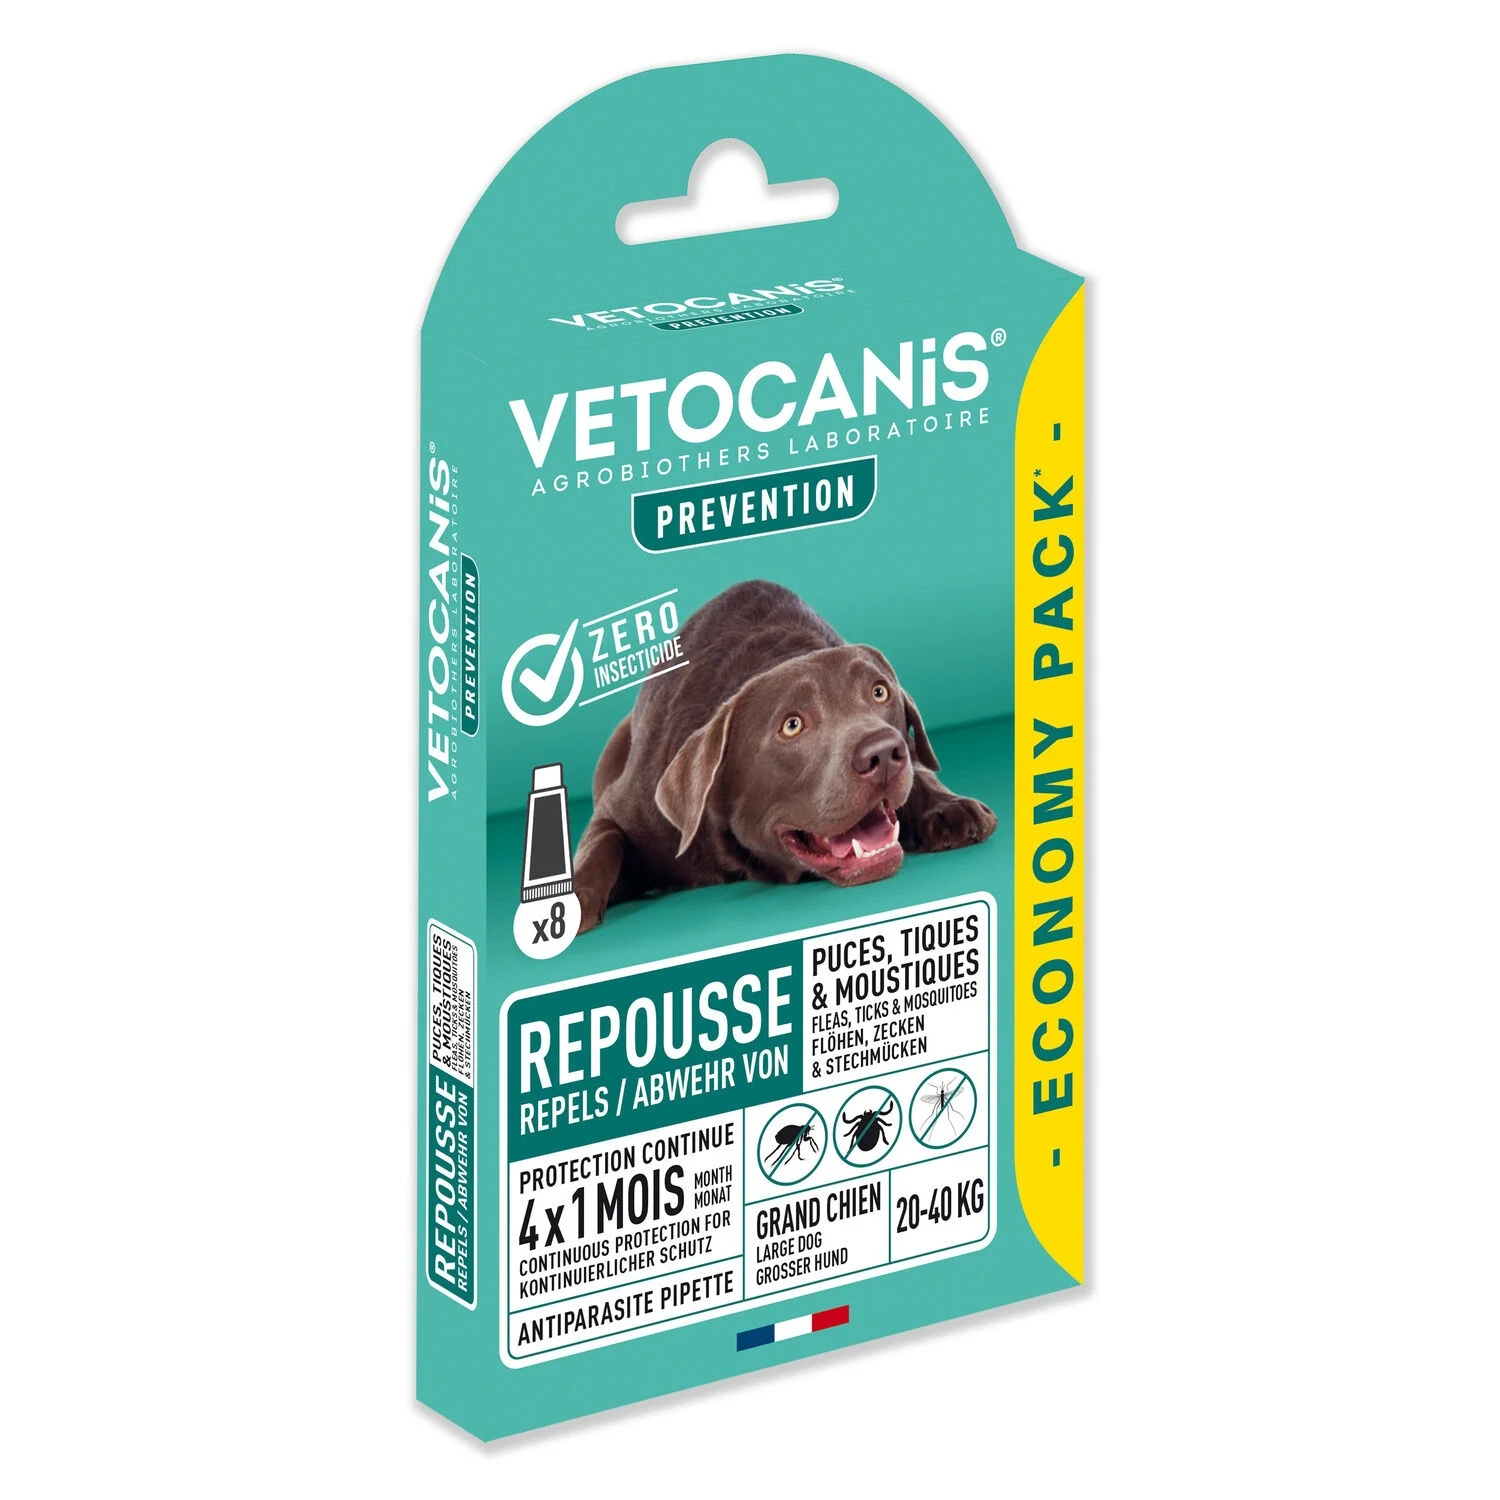 8x3ml Pipette Antiparasitaire Pour Grand Chien Adulte - Vetocanis